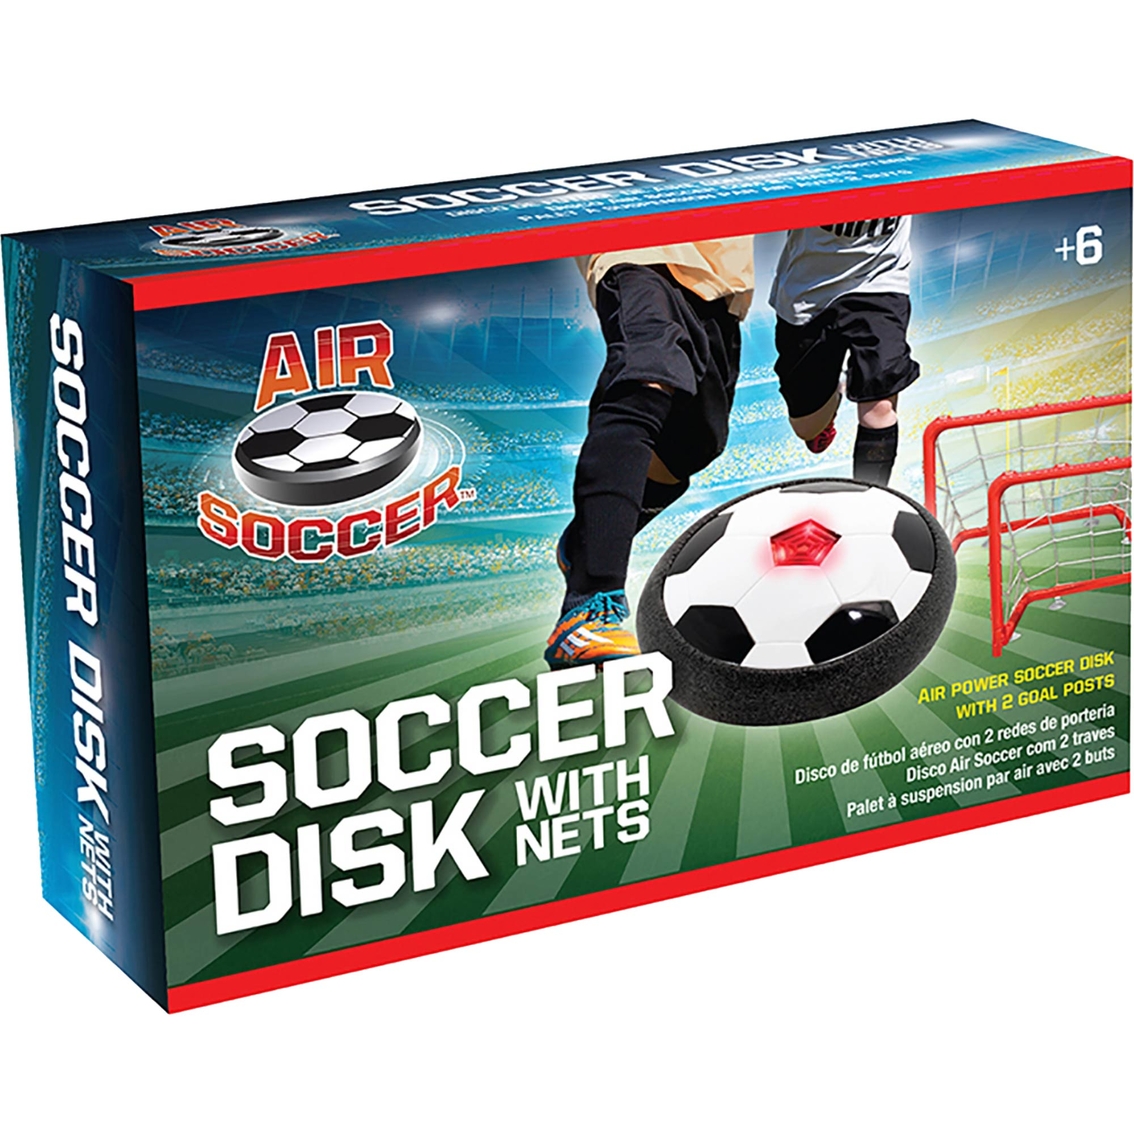 Maccabi Art Air Soccer Hover Ball Disk Game with 2 Goal Post Nets - Image 2 of 5